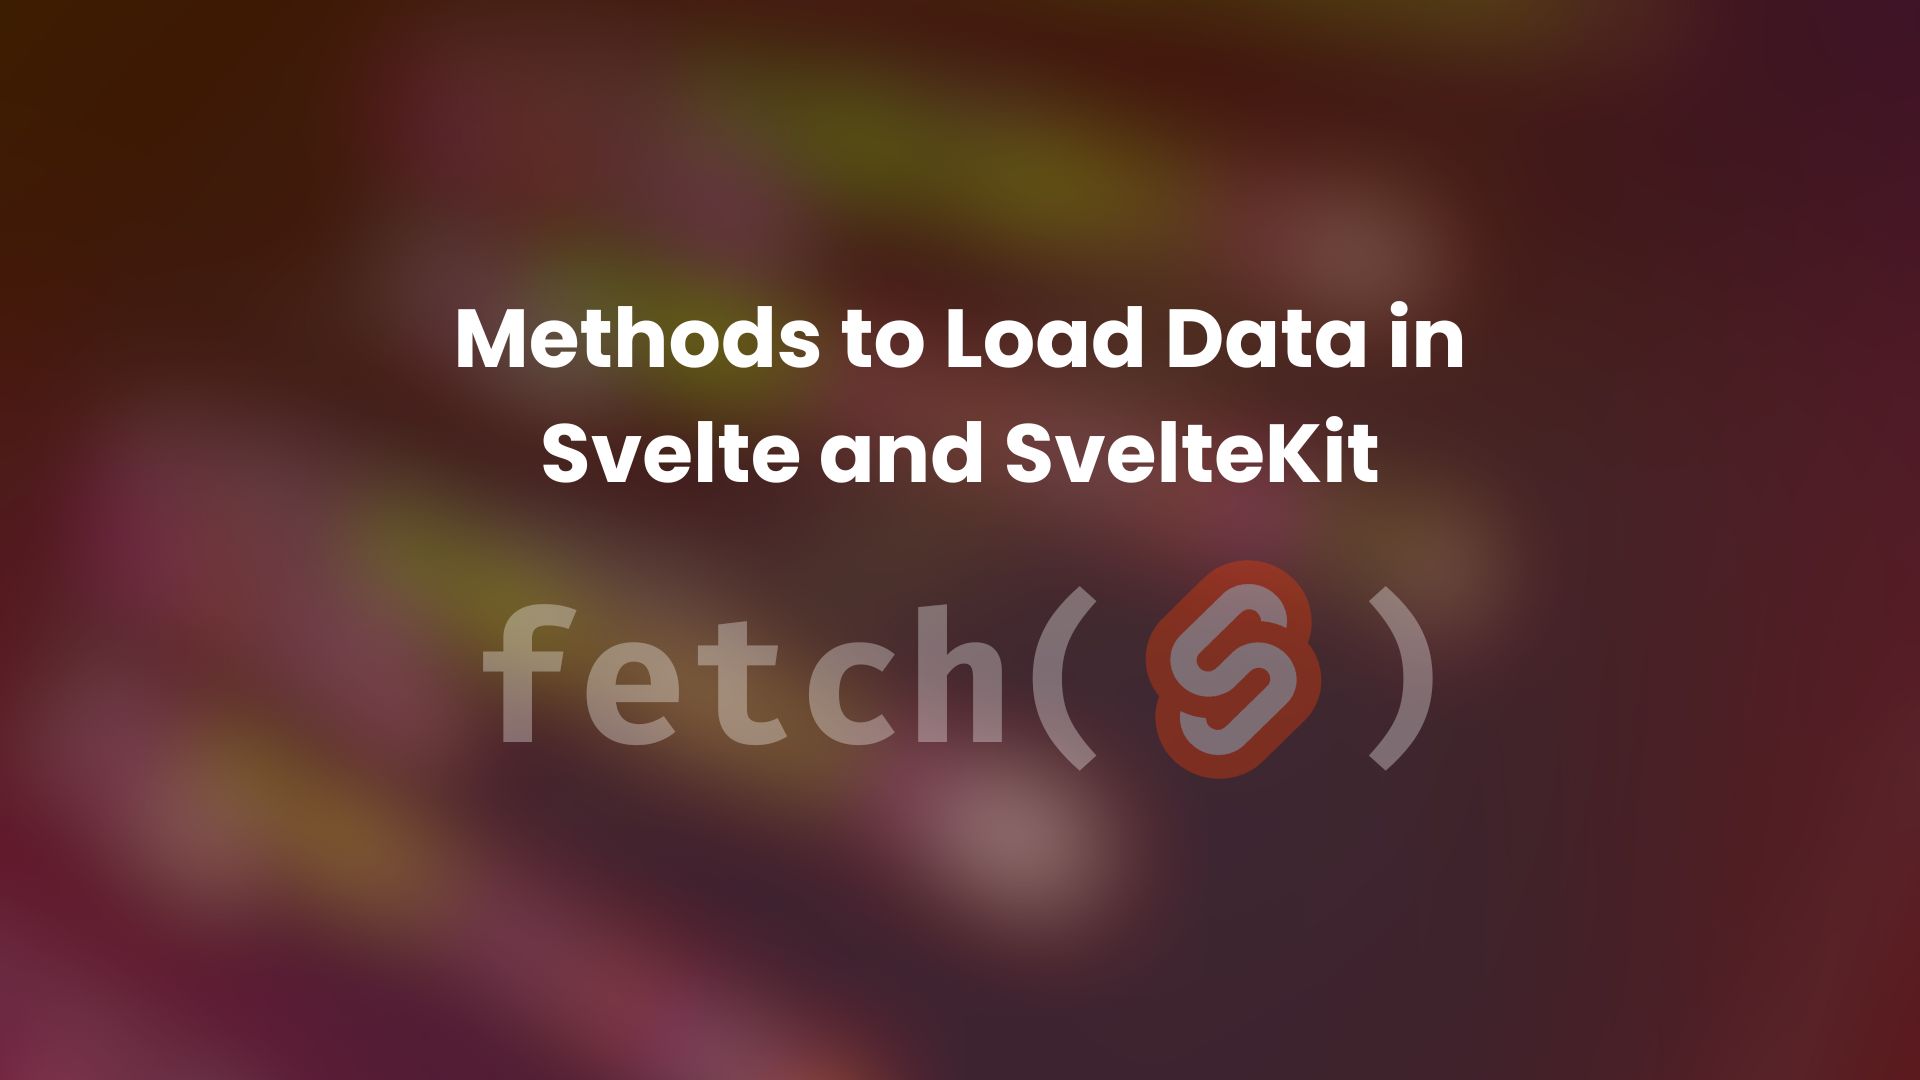 Methods to Load Data in Svelte and SvelteKit image